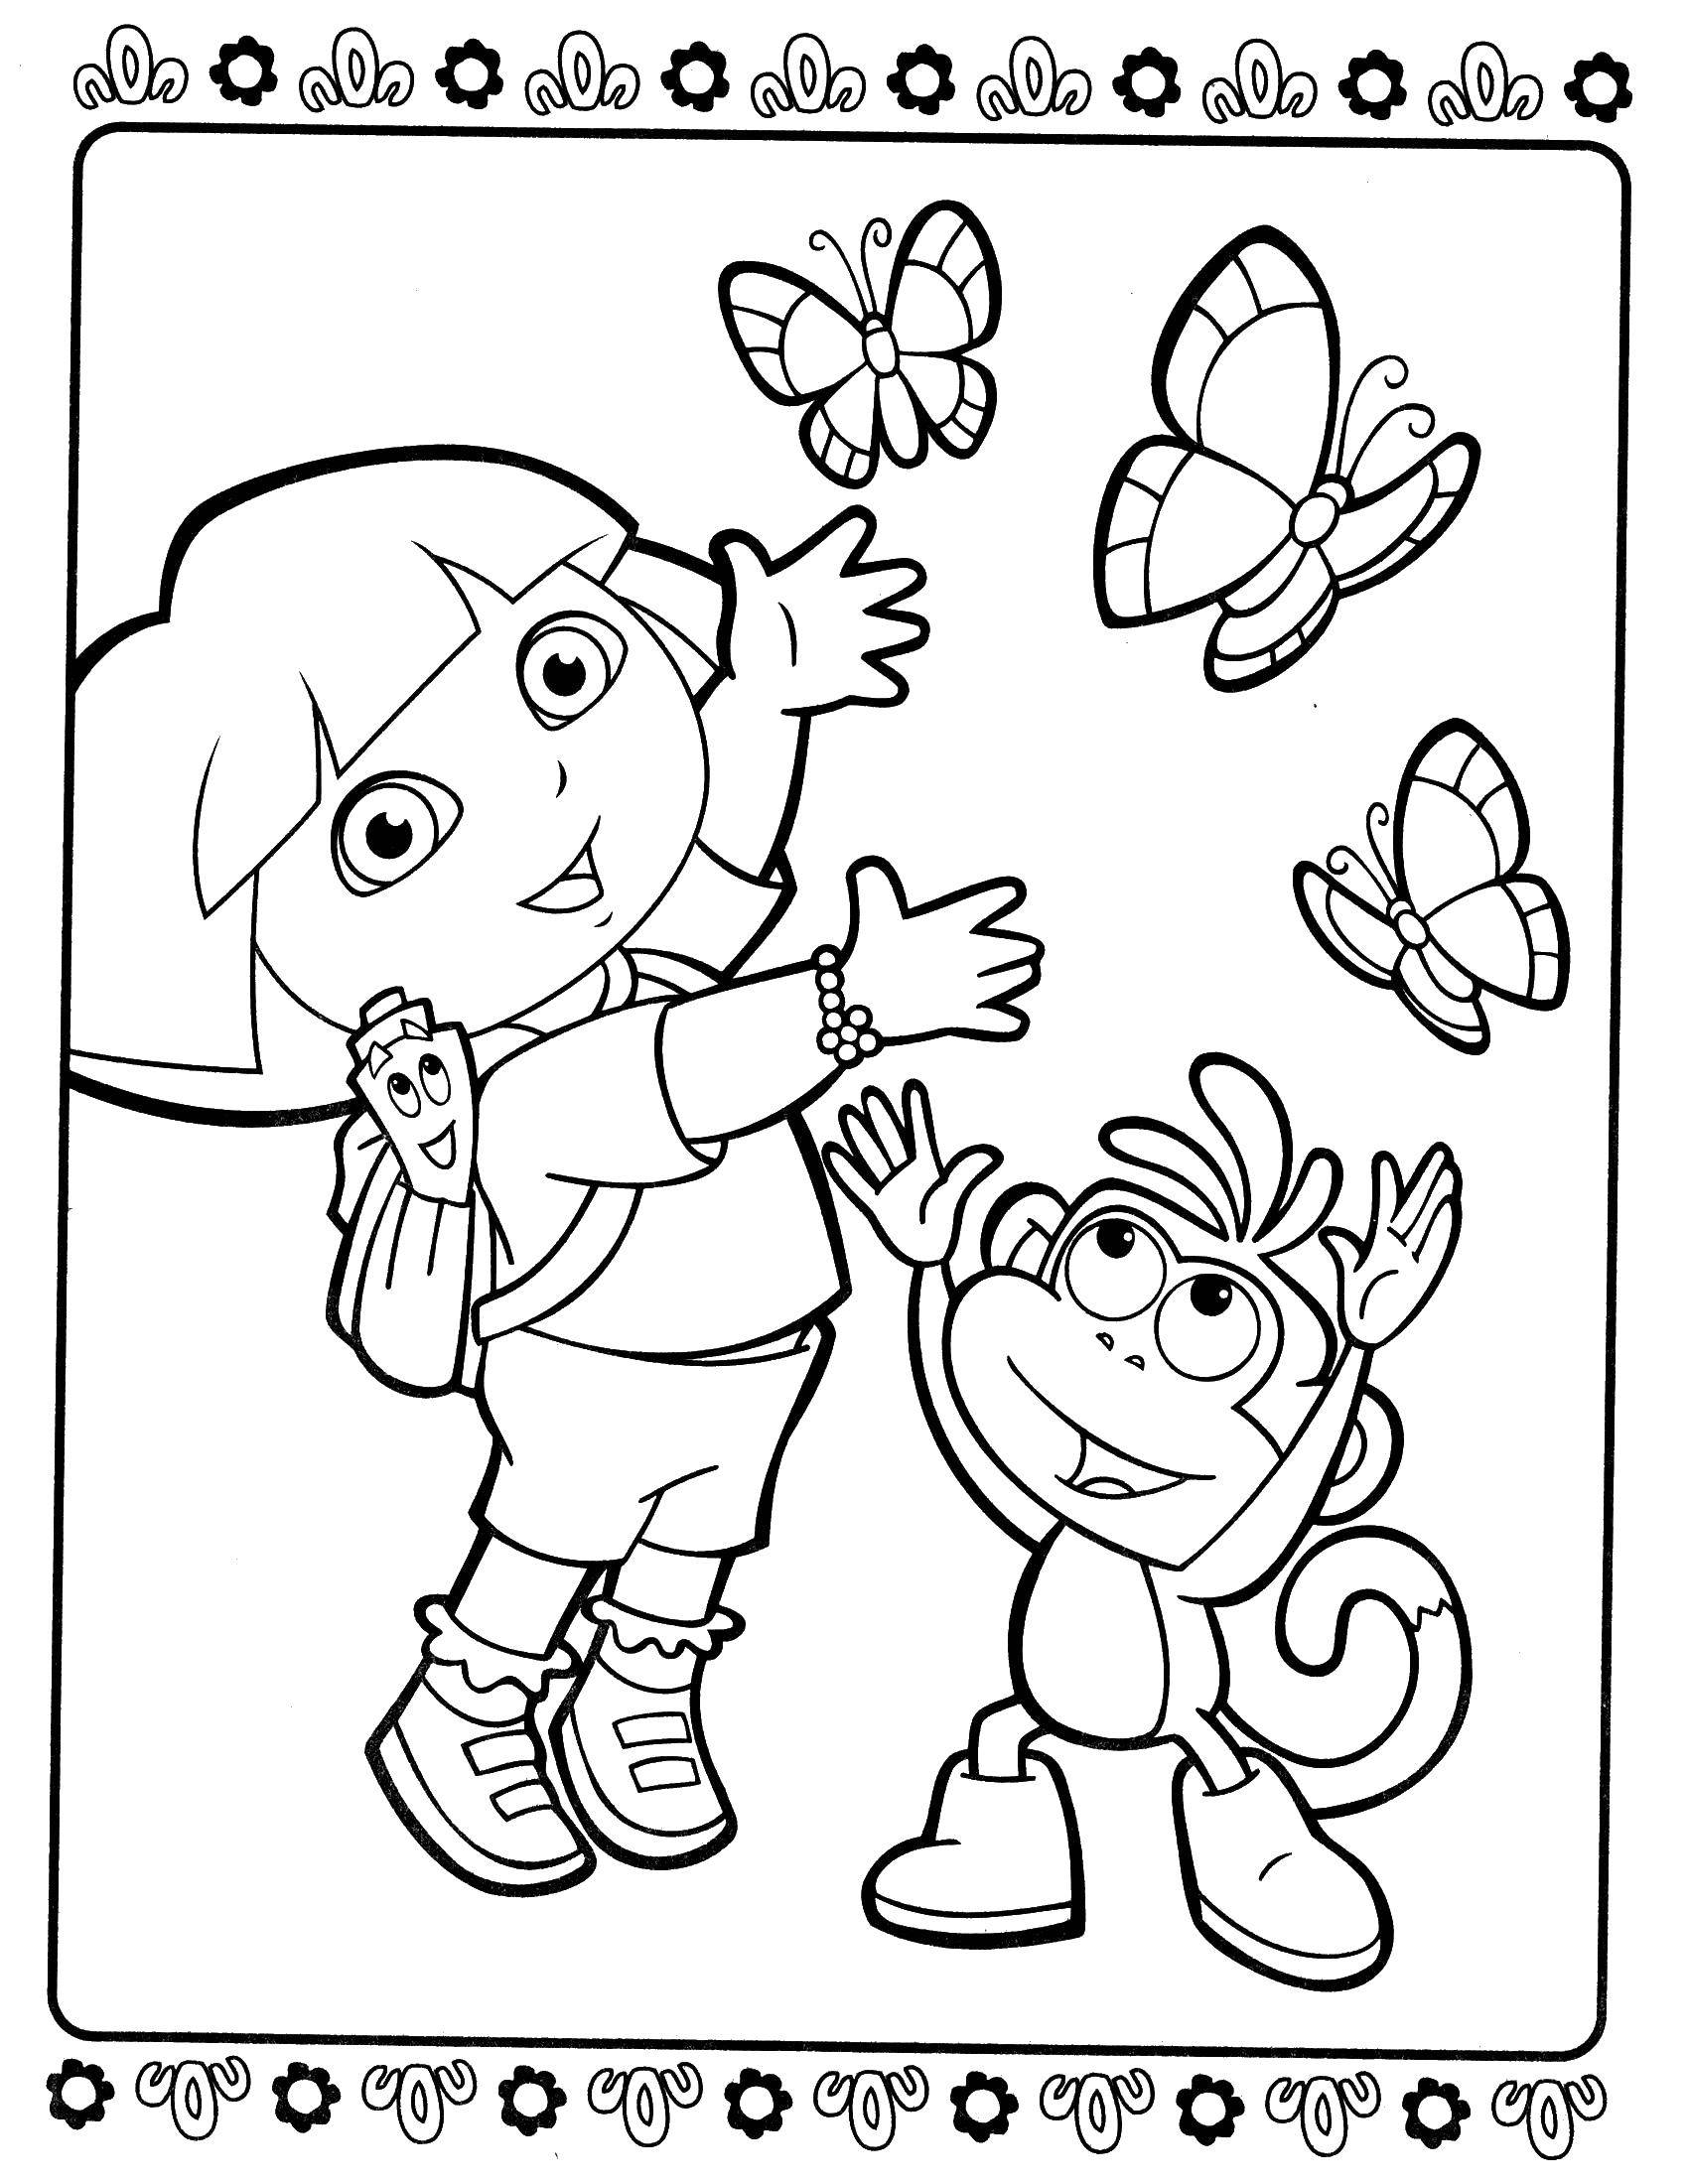 Coloring Catching butterflies.. Category Dasha traveler. Tags:  Cartoon character.